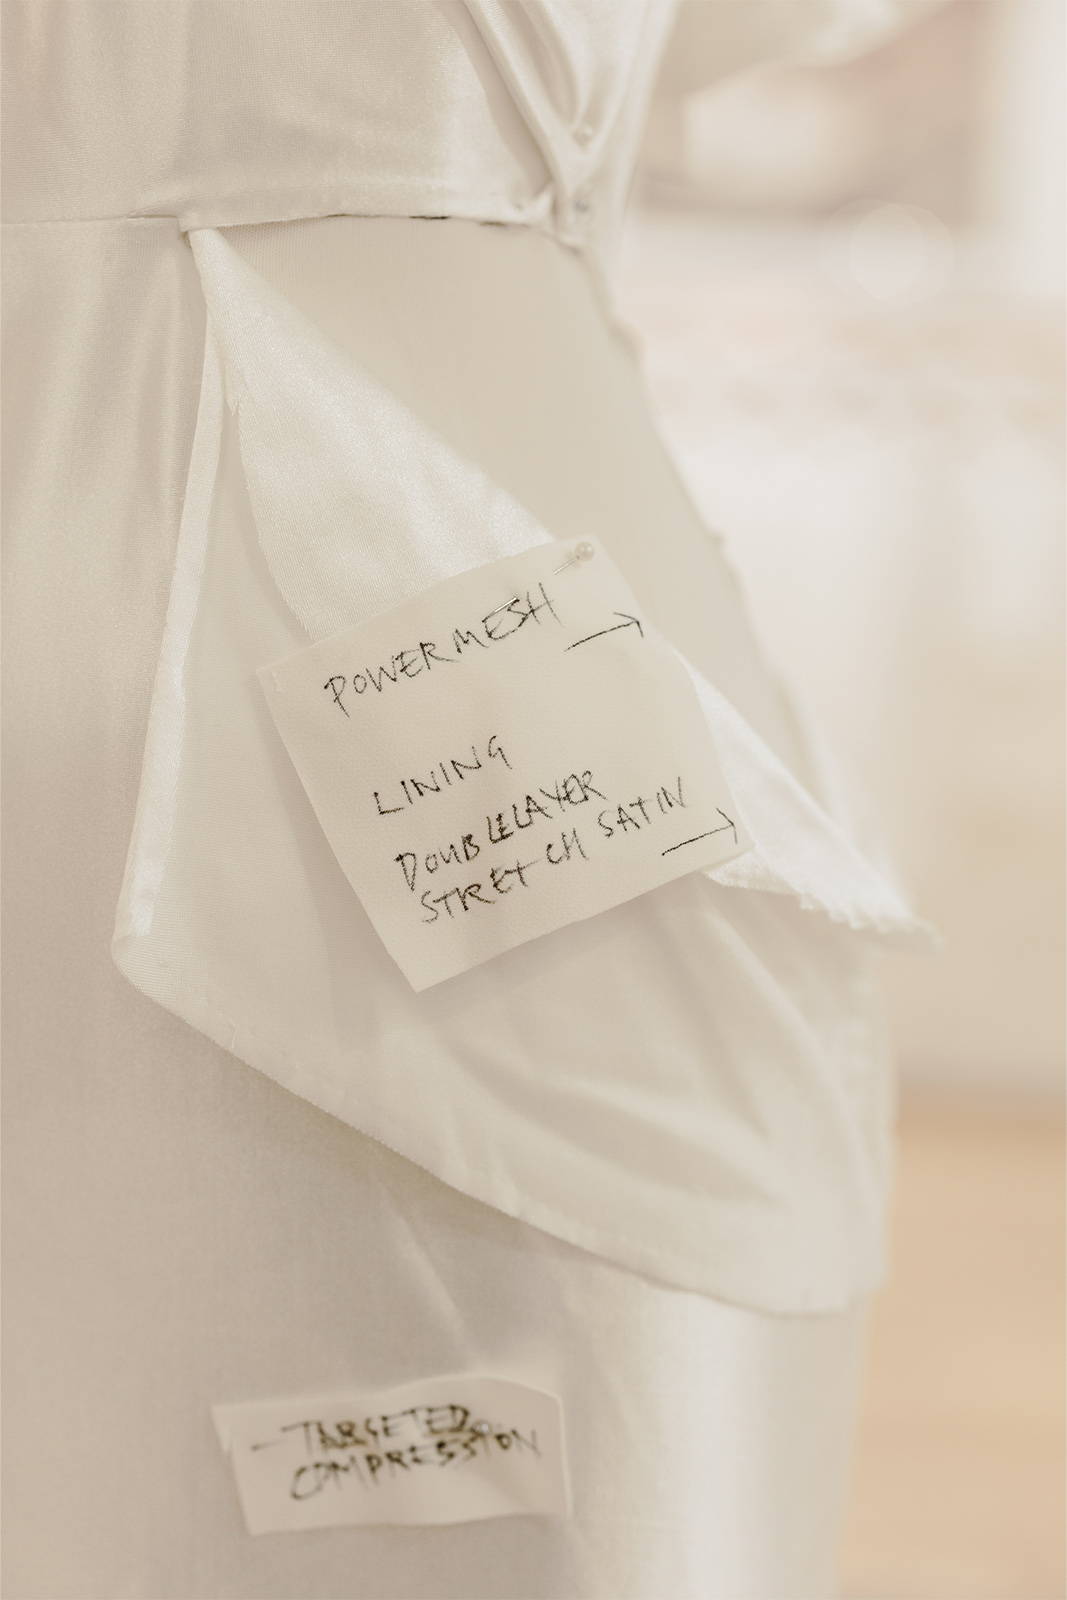 A deconstructed sample of the Cupid gown with design notes